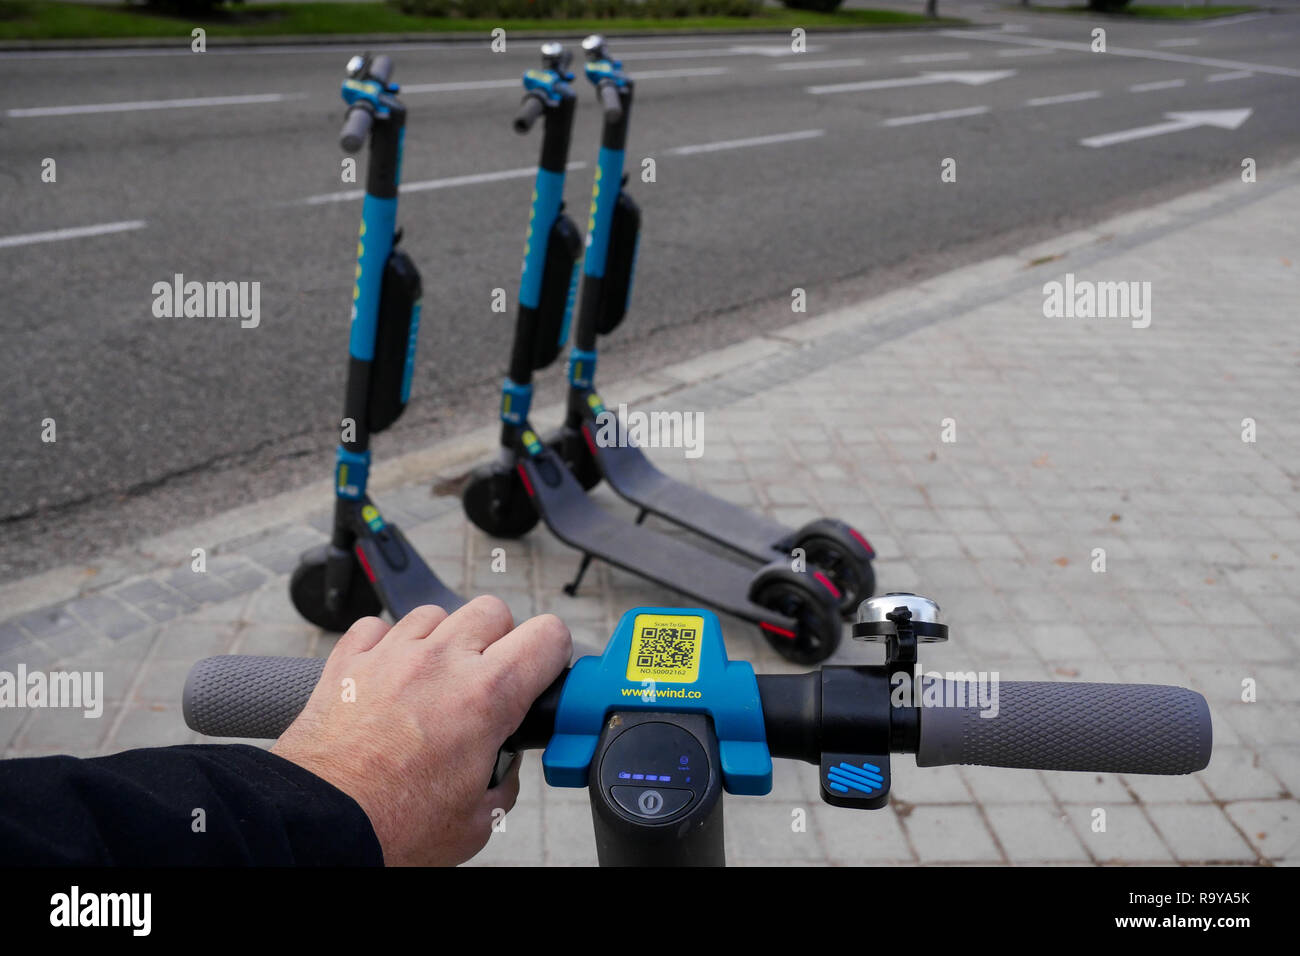 Wind electric Light scooters, Madrid, Spain Stock Photo - Alamy